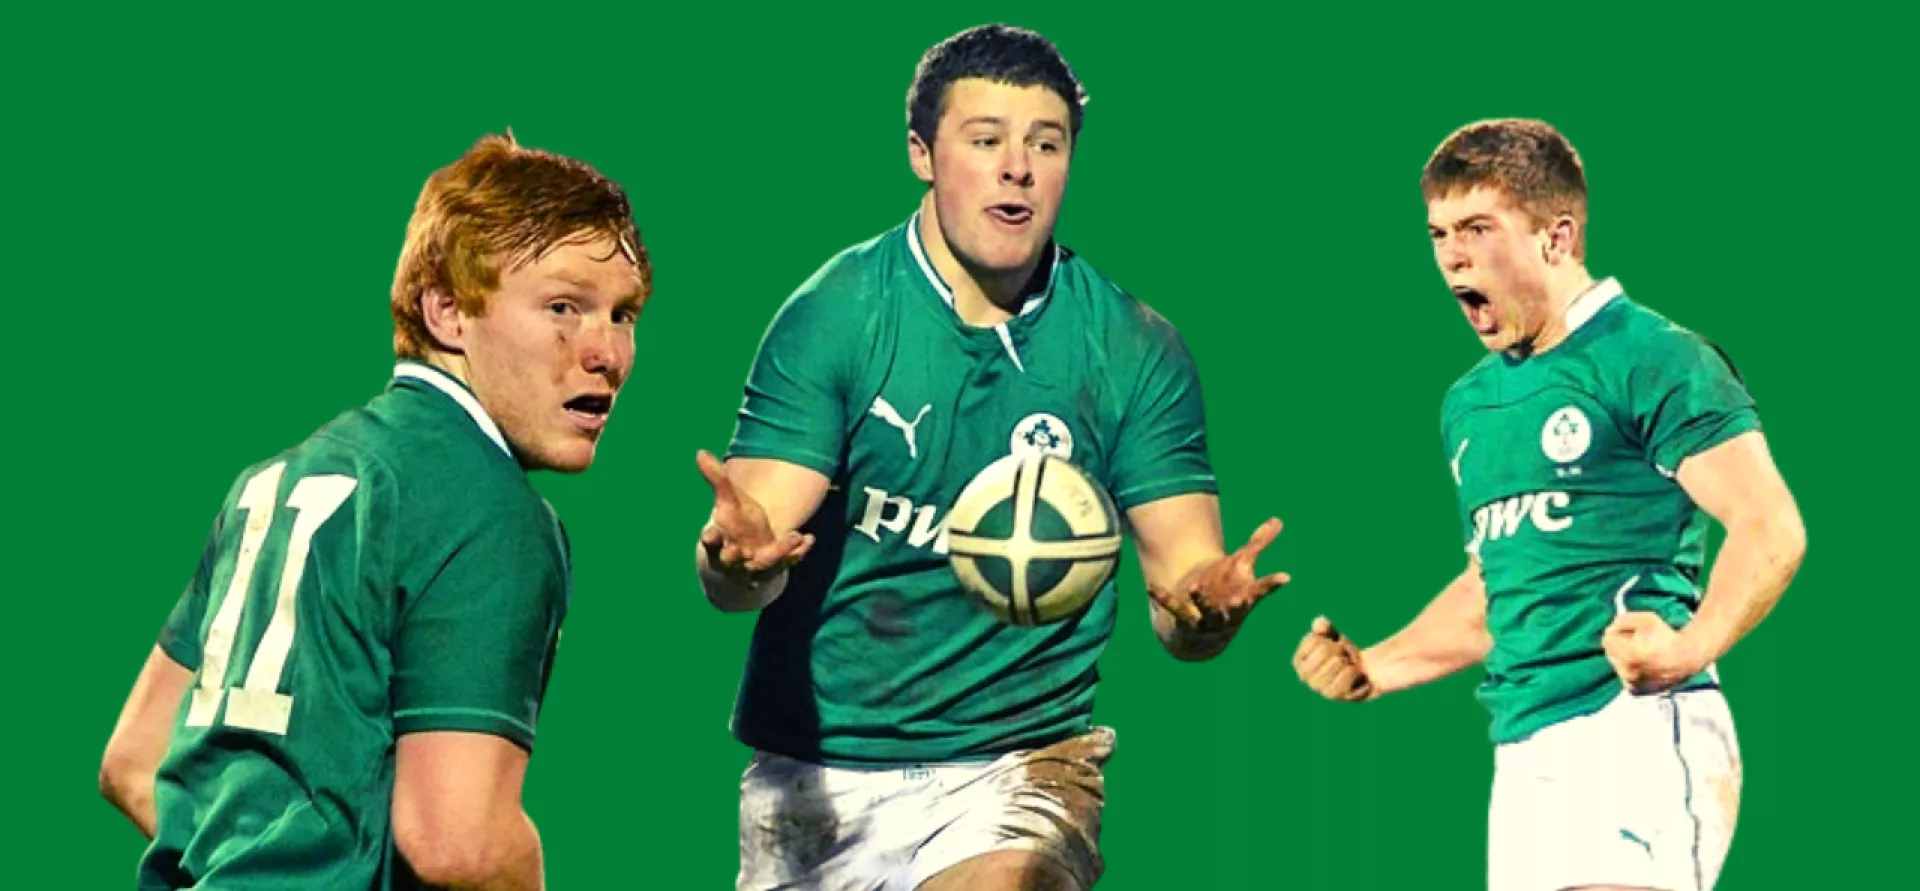 The 2013 Ireland U20s - Where Are They now?